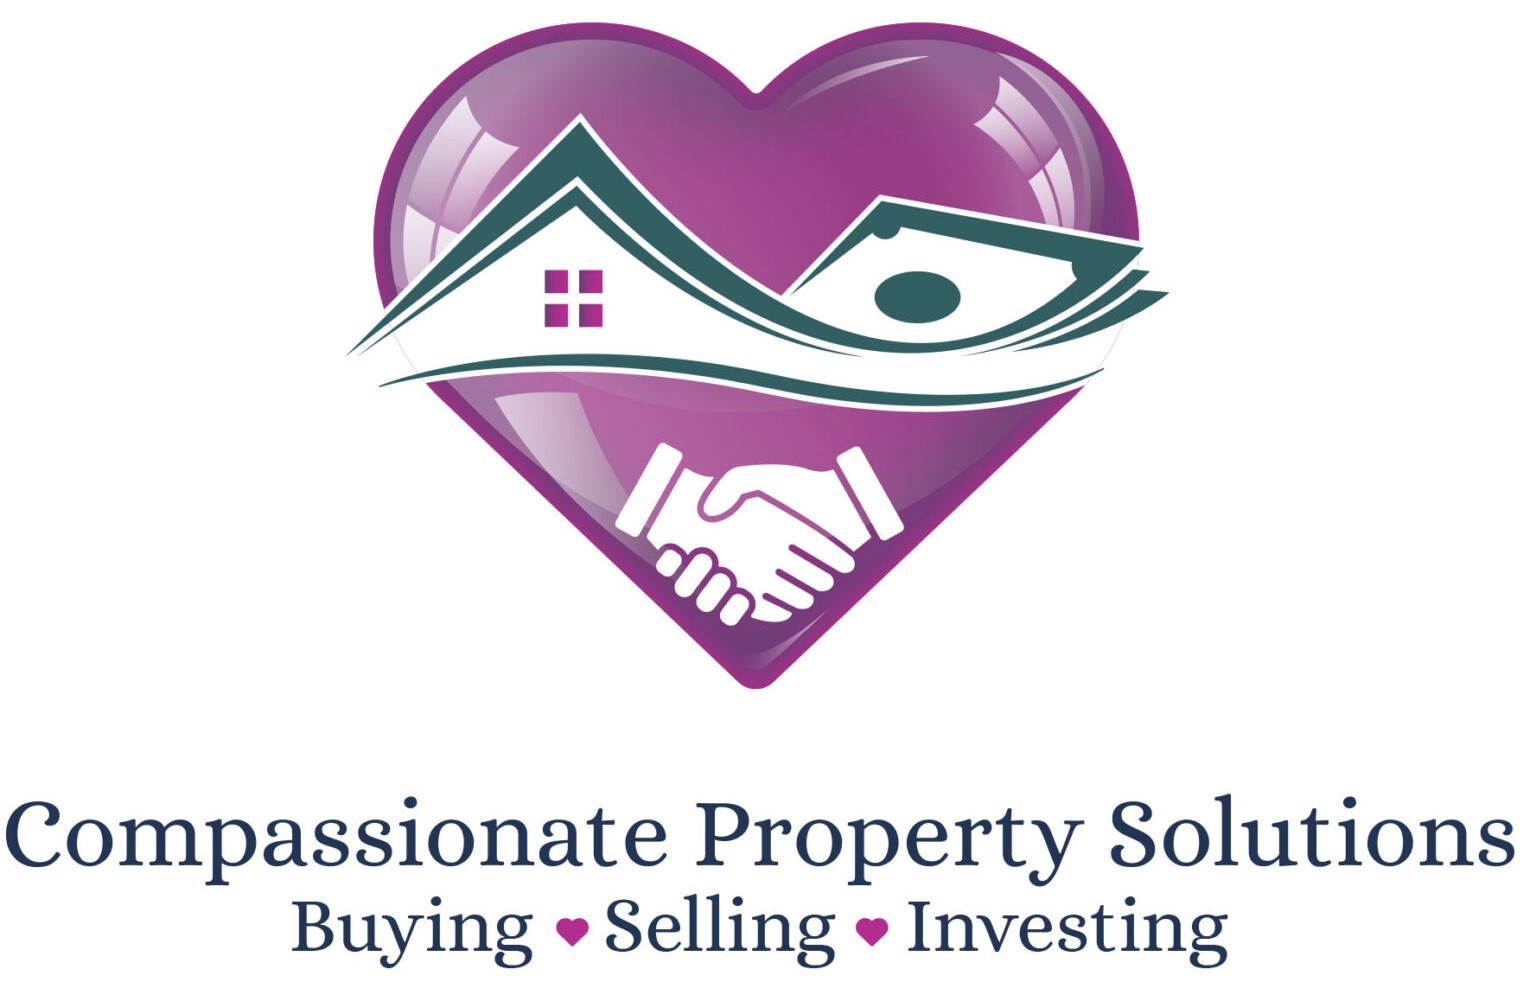 Compassionate Property Solutions